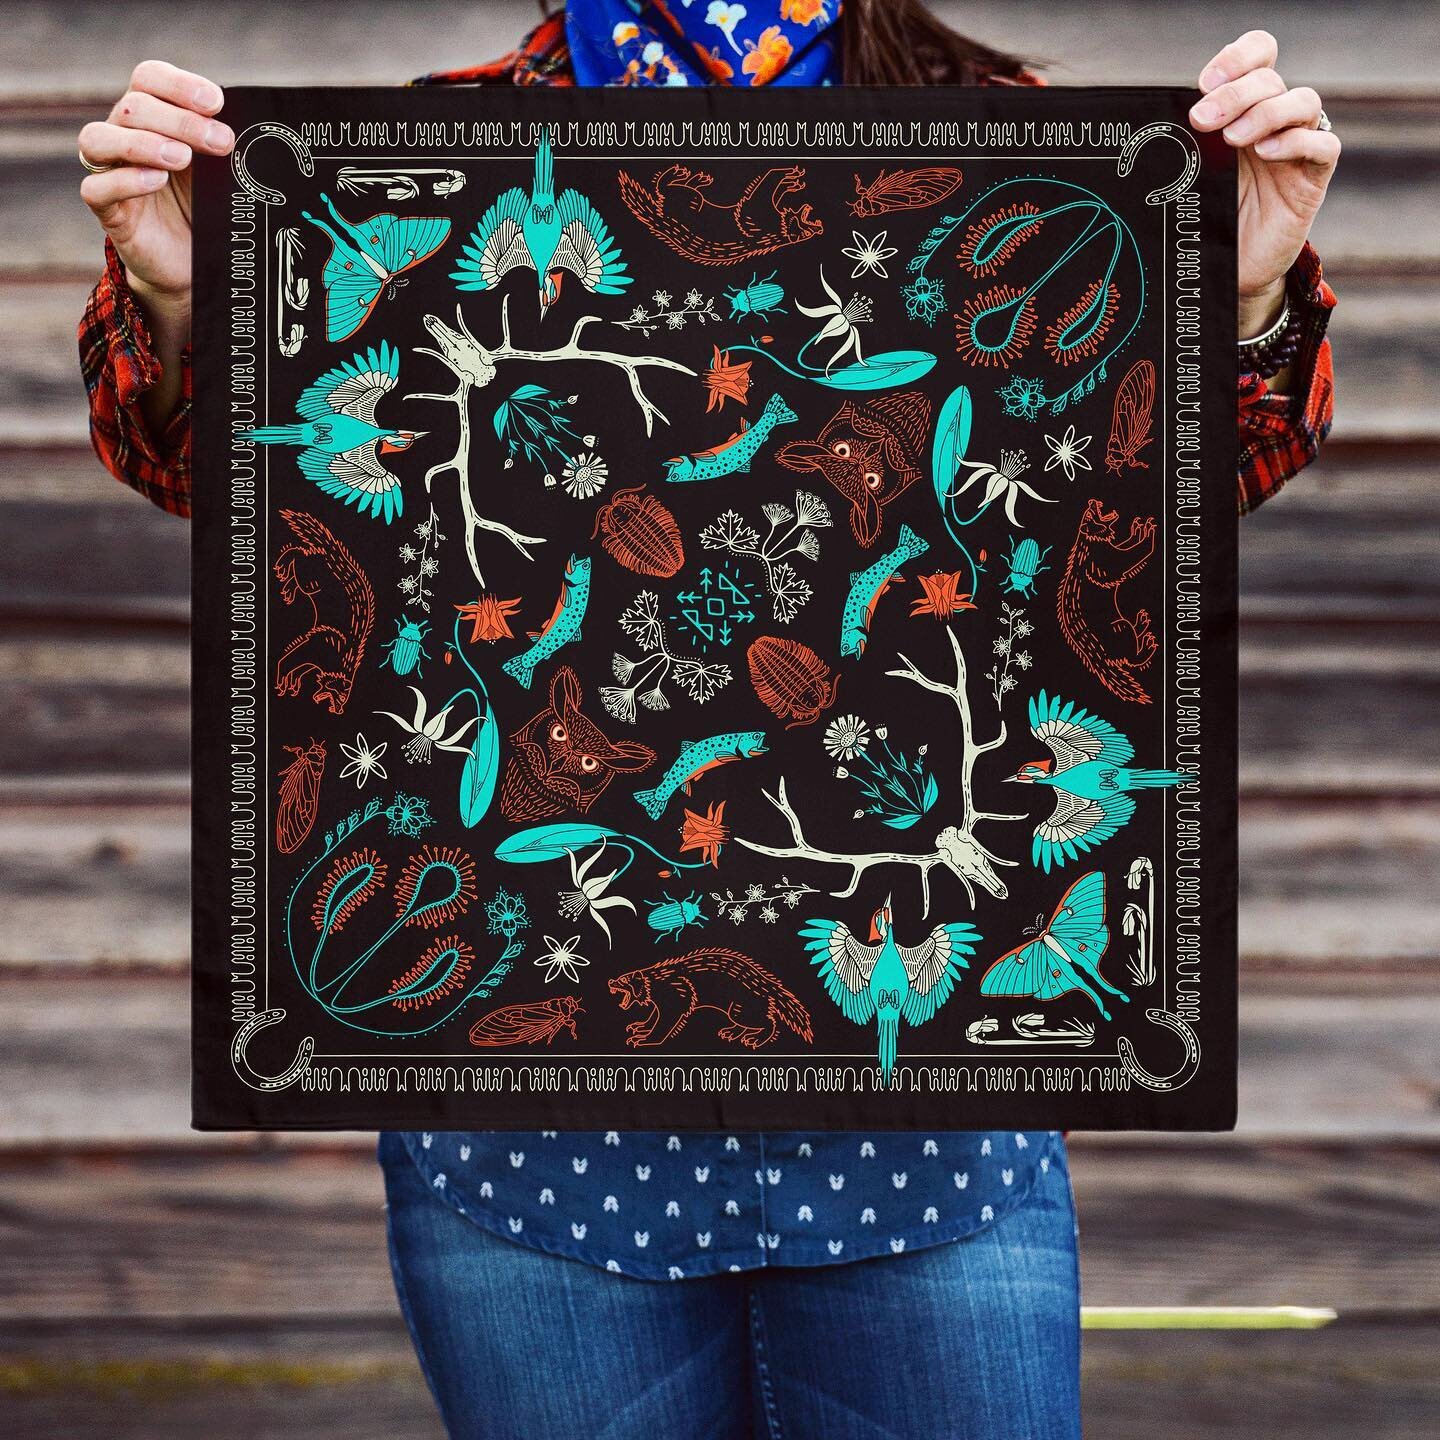 This new Bob Marshall Wilderness bandana is very special to me because eight and a half years ago, I embarked on a solo, nearly 100 mile adventure through the Bob with only my trusty steed Ben and a bun in the oven.

This beautiful black bandana feat